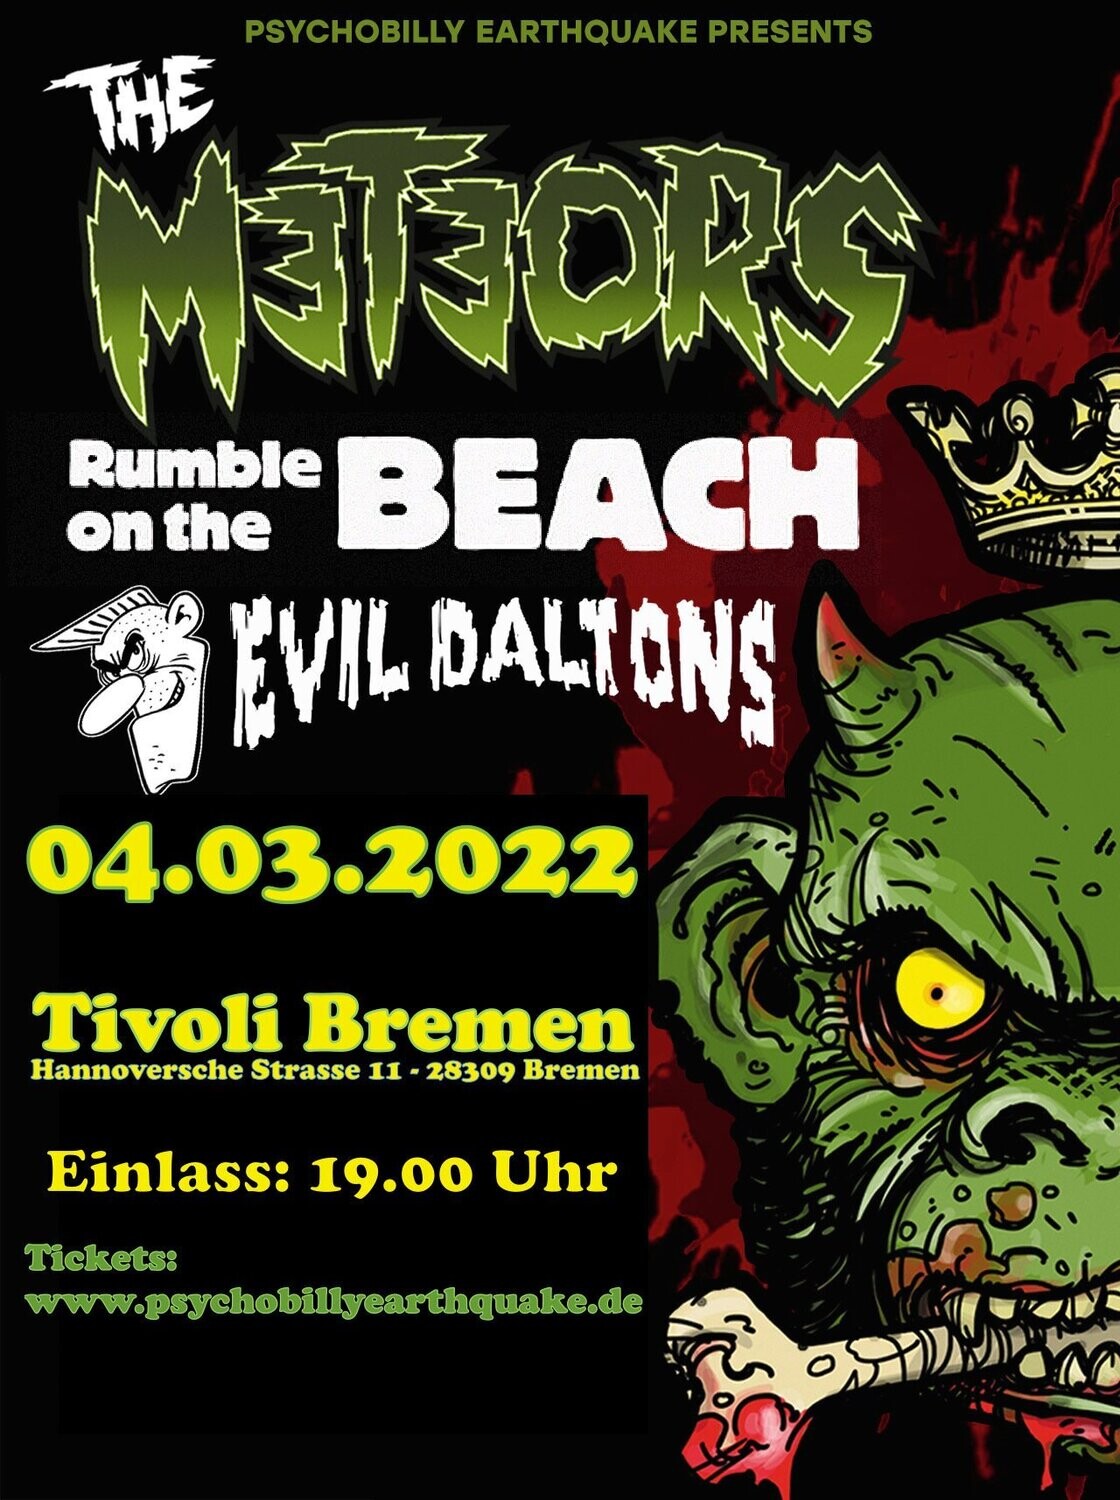 04.03.2022 - THE M3T3ORS + Rumble On The Beach + Evil Daltons